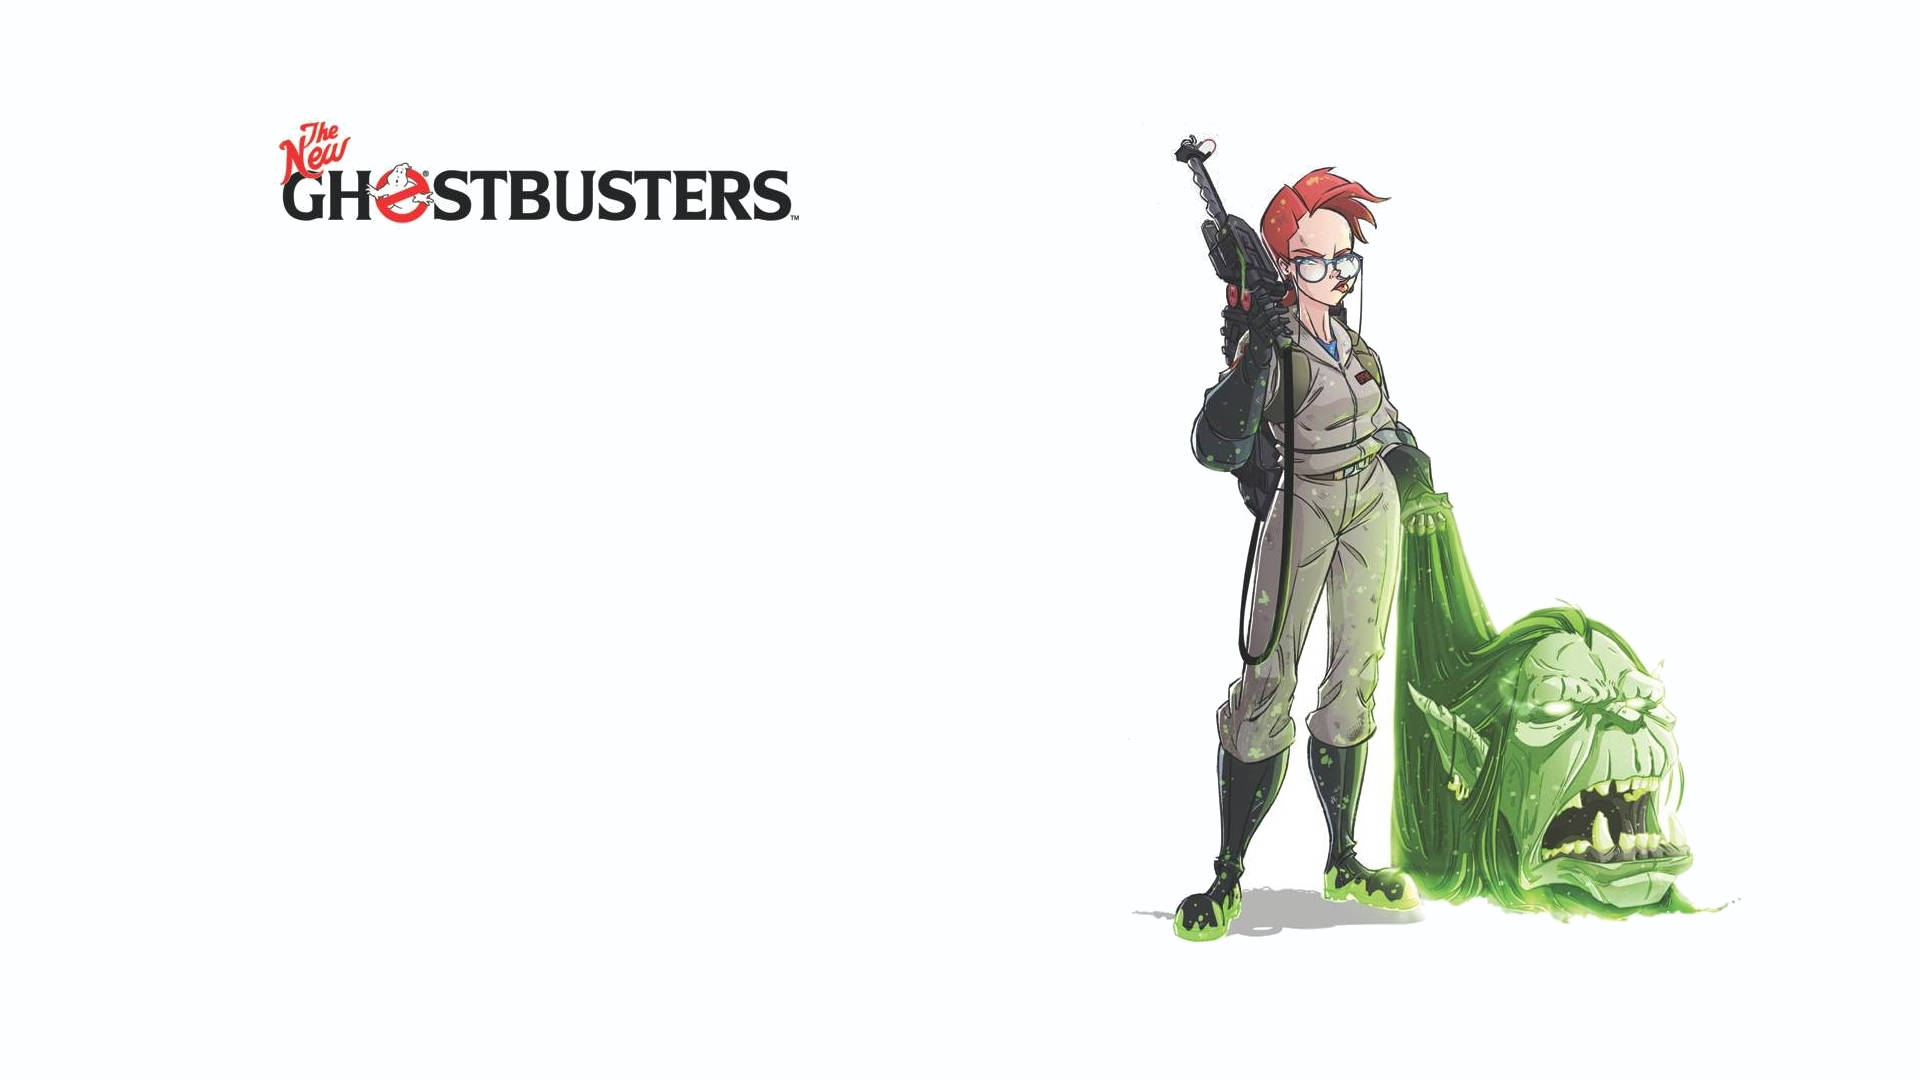 The New Ghostbusters